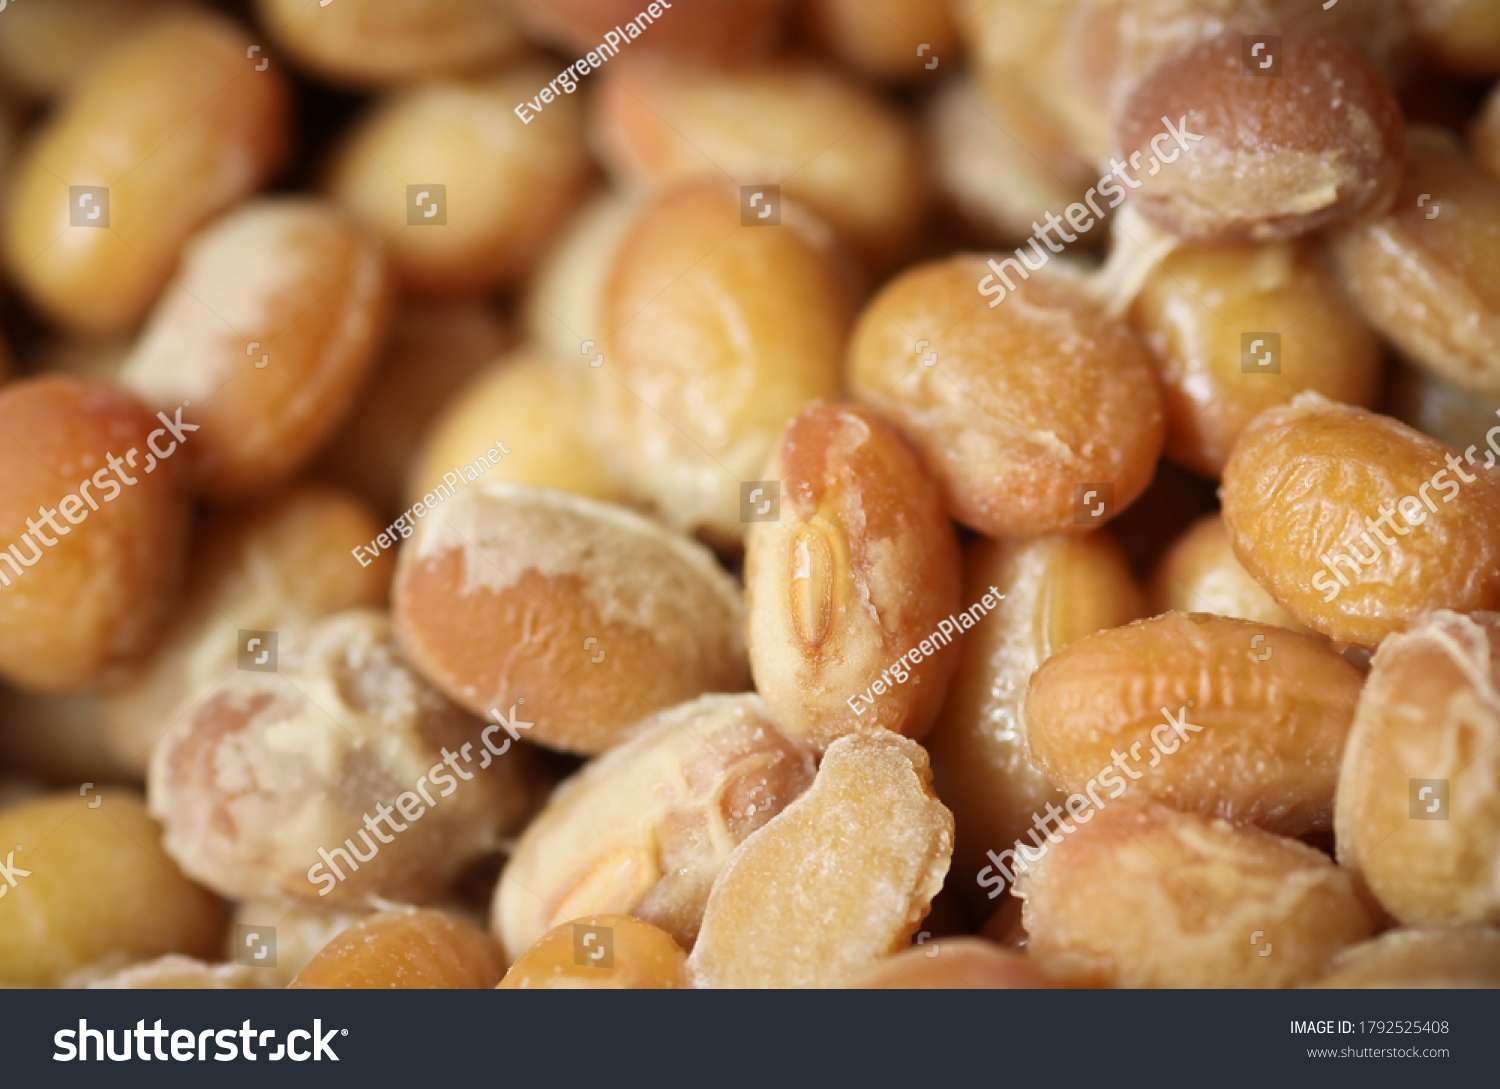 Soybeans fermented with bacillus subtilis var. natto for producing "natto" which is traditional Japanese food #1792525408